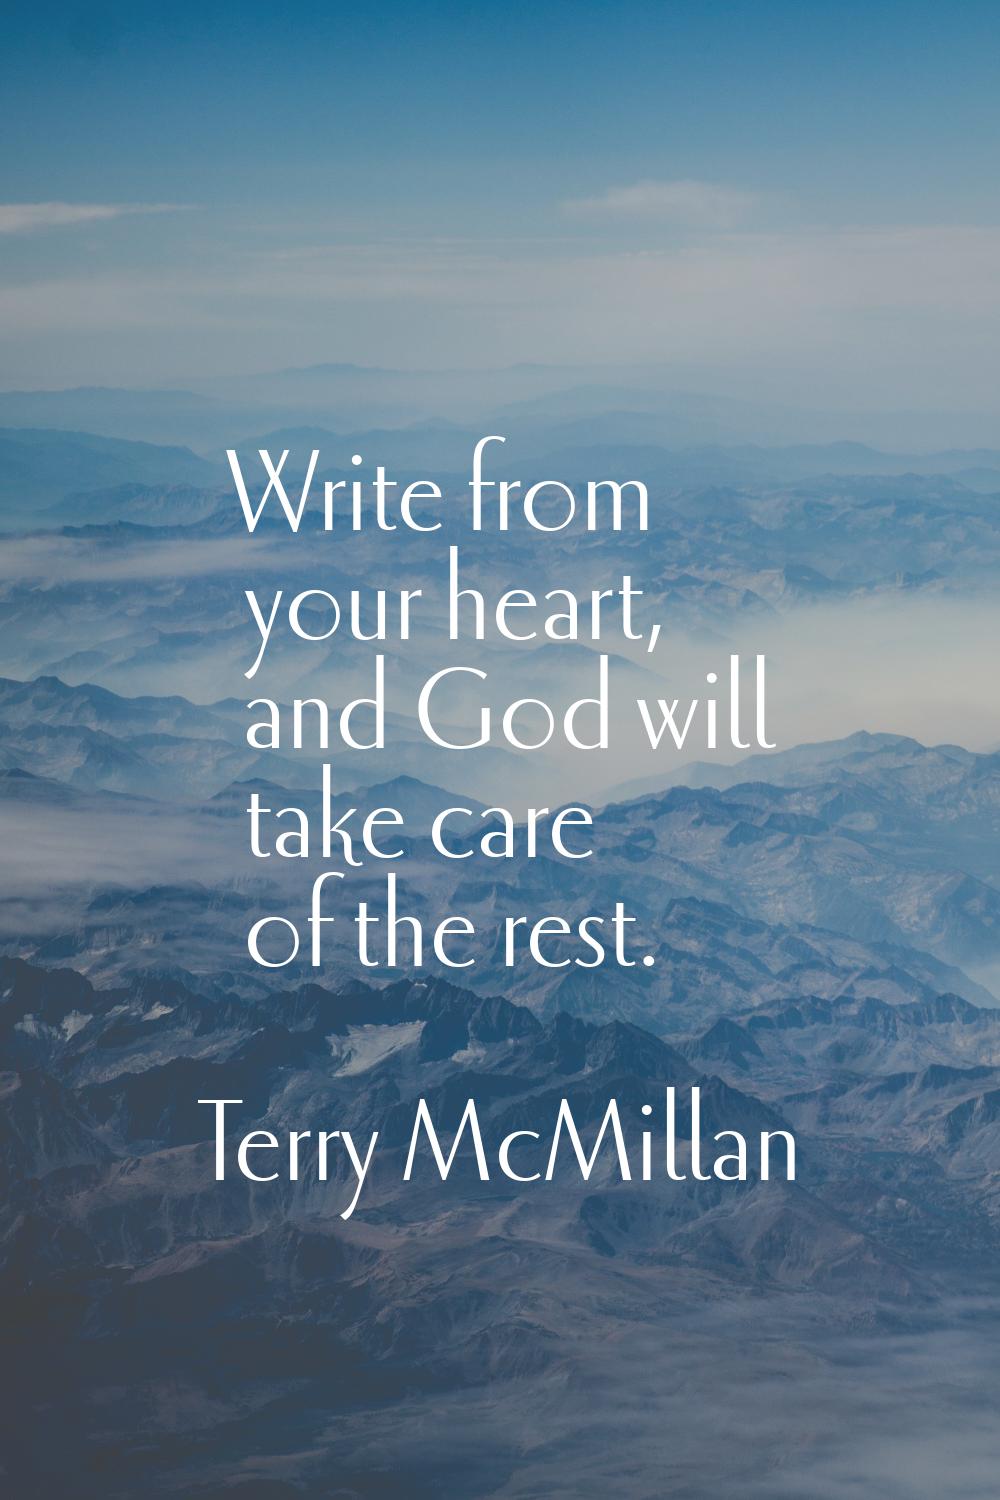 Write from your heart, and God will take care of the rest.